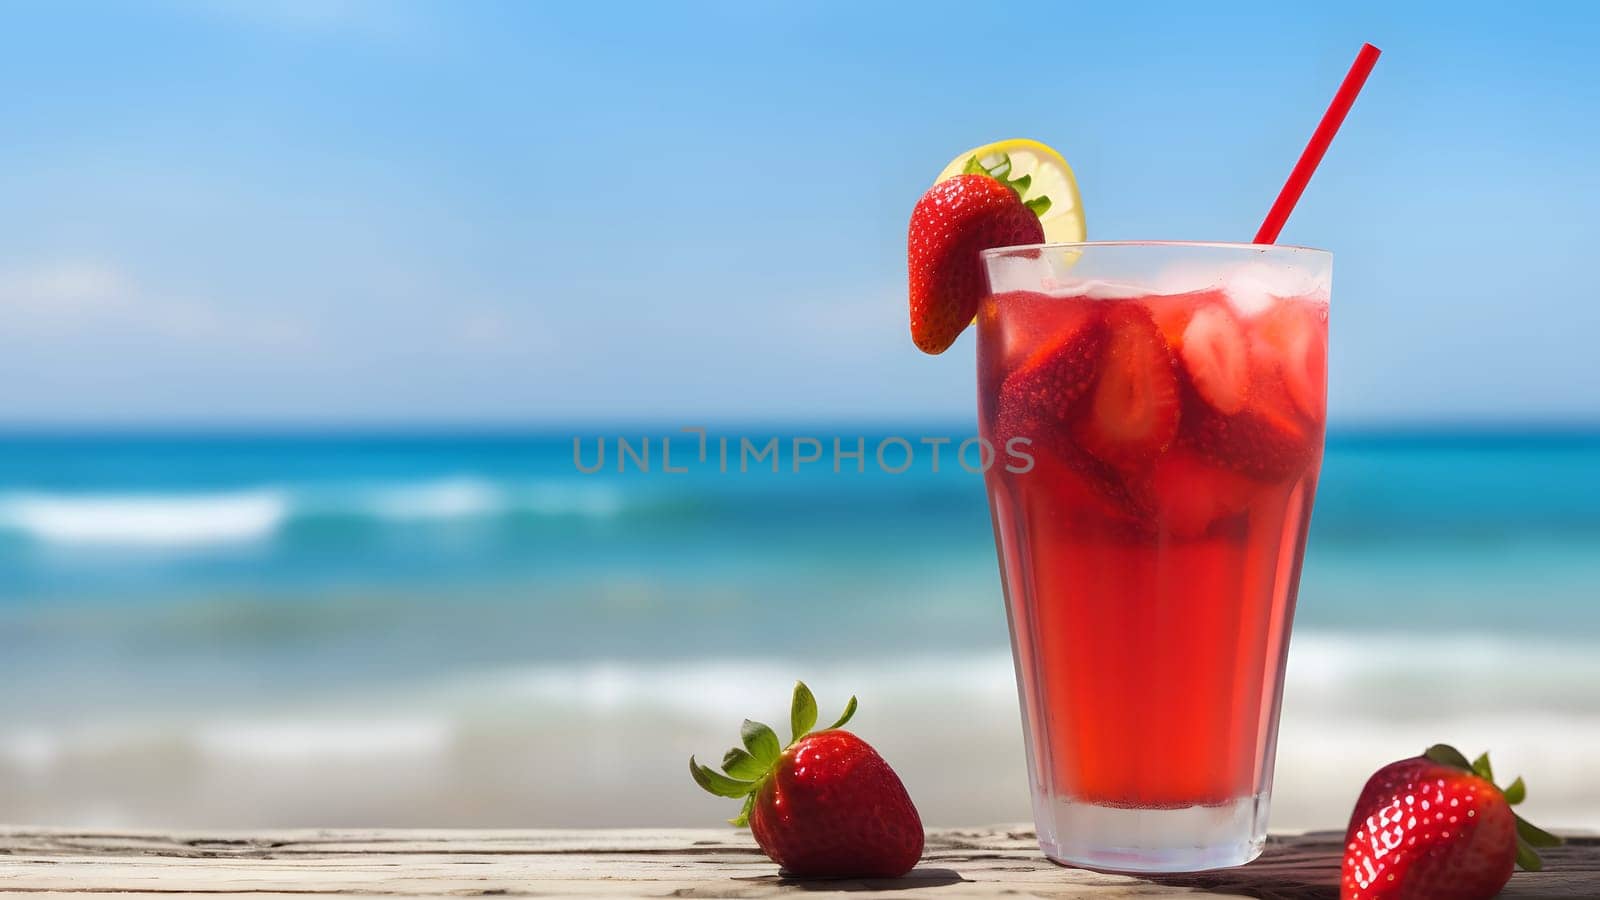 A glass of strawberries cold refreshing drink on sea background at sunny summer day. Neural network generated in May 2023. Not based on any actual person, scene or pattern.